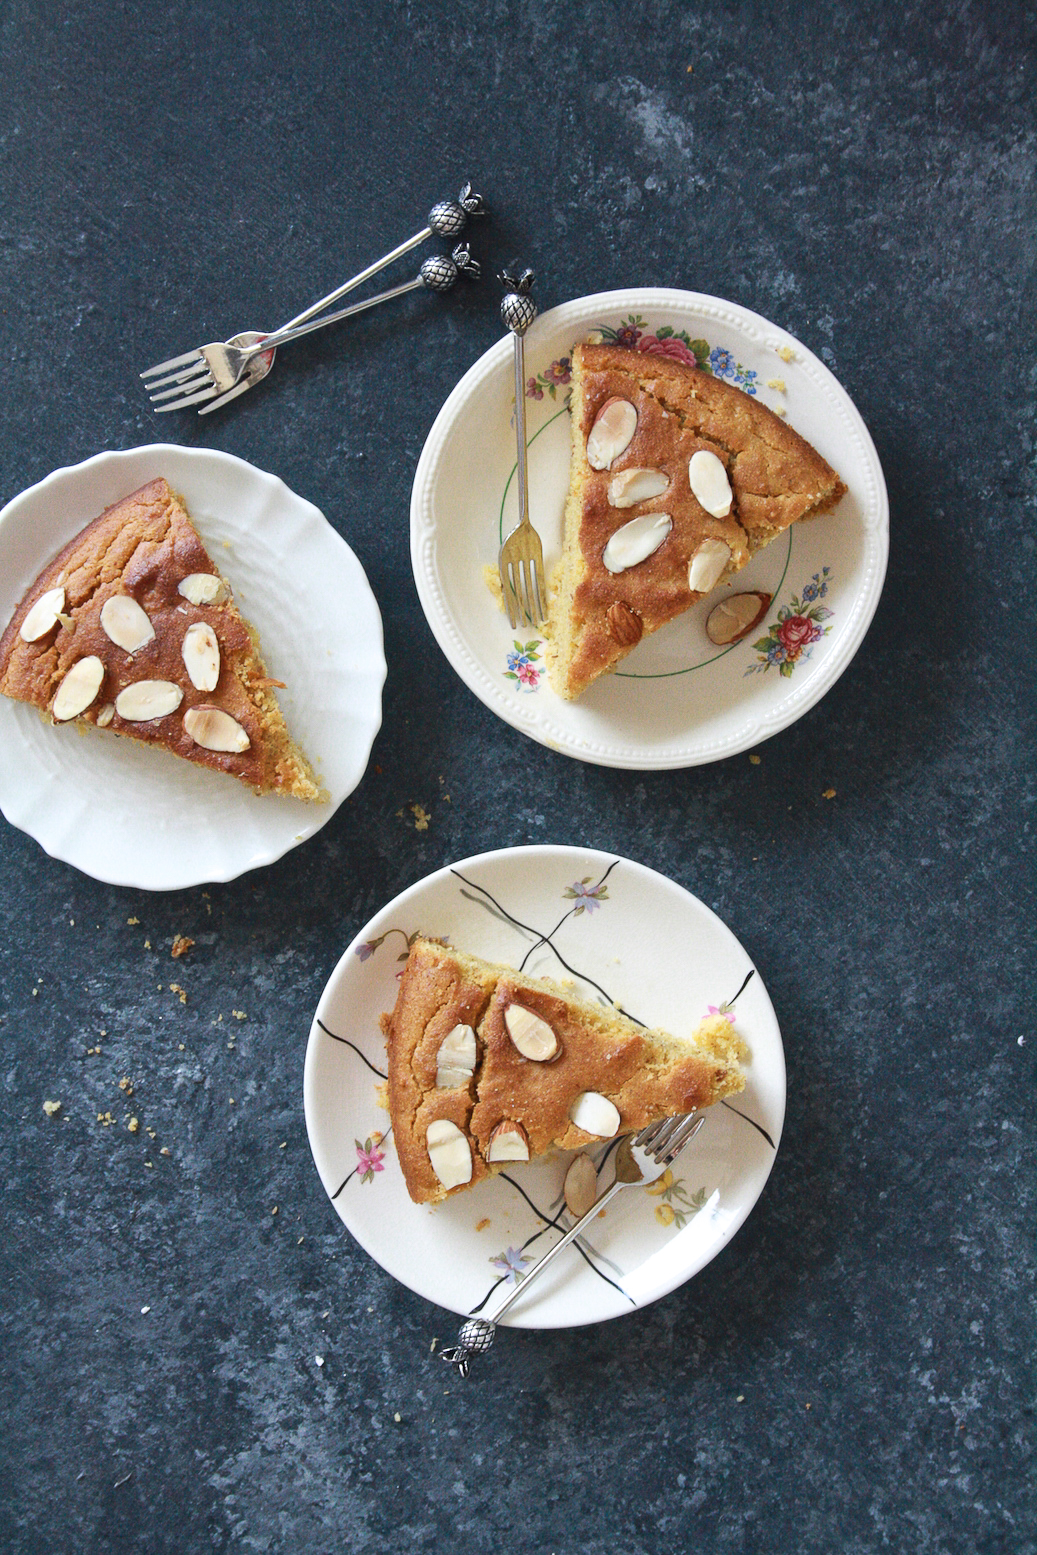 A gluten-free, super flavourful cake made with ground almonds and cornmeal!